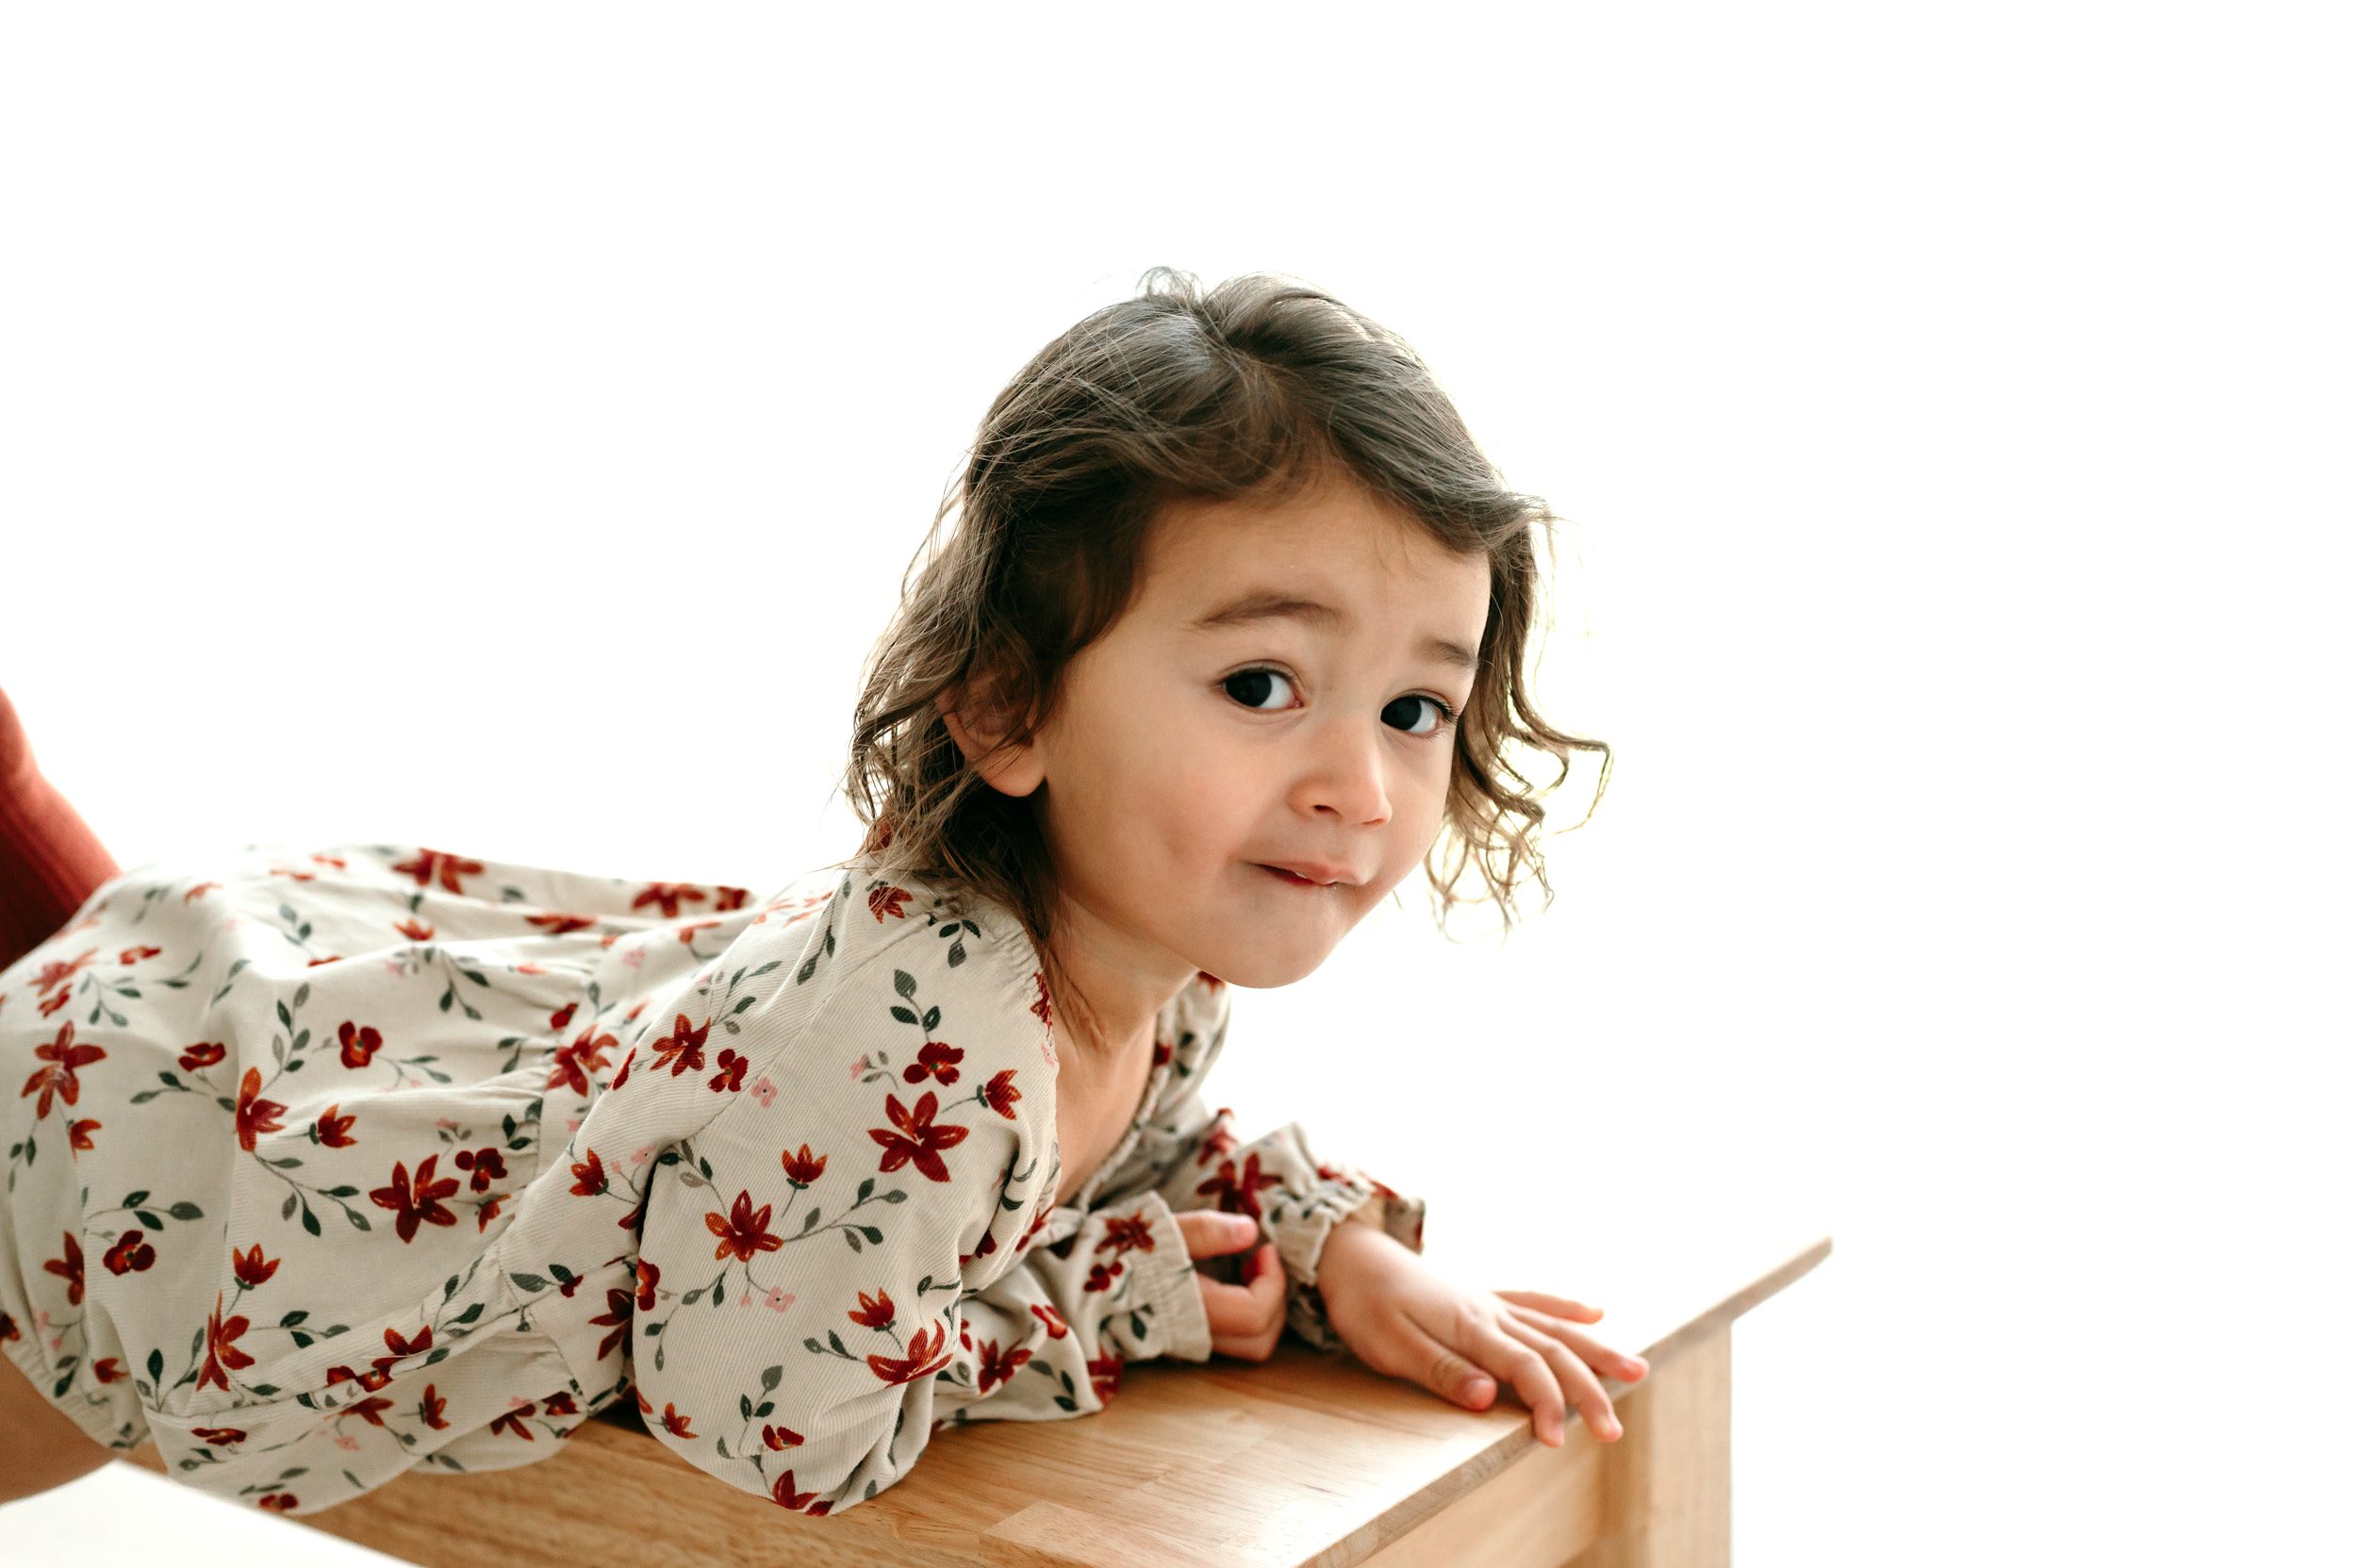 a backlit picture of a young girl laying on a wooden bench and looking directly at the camera during a toddler milestone photoshoot